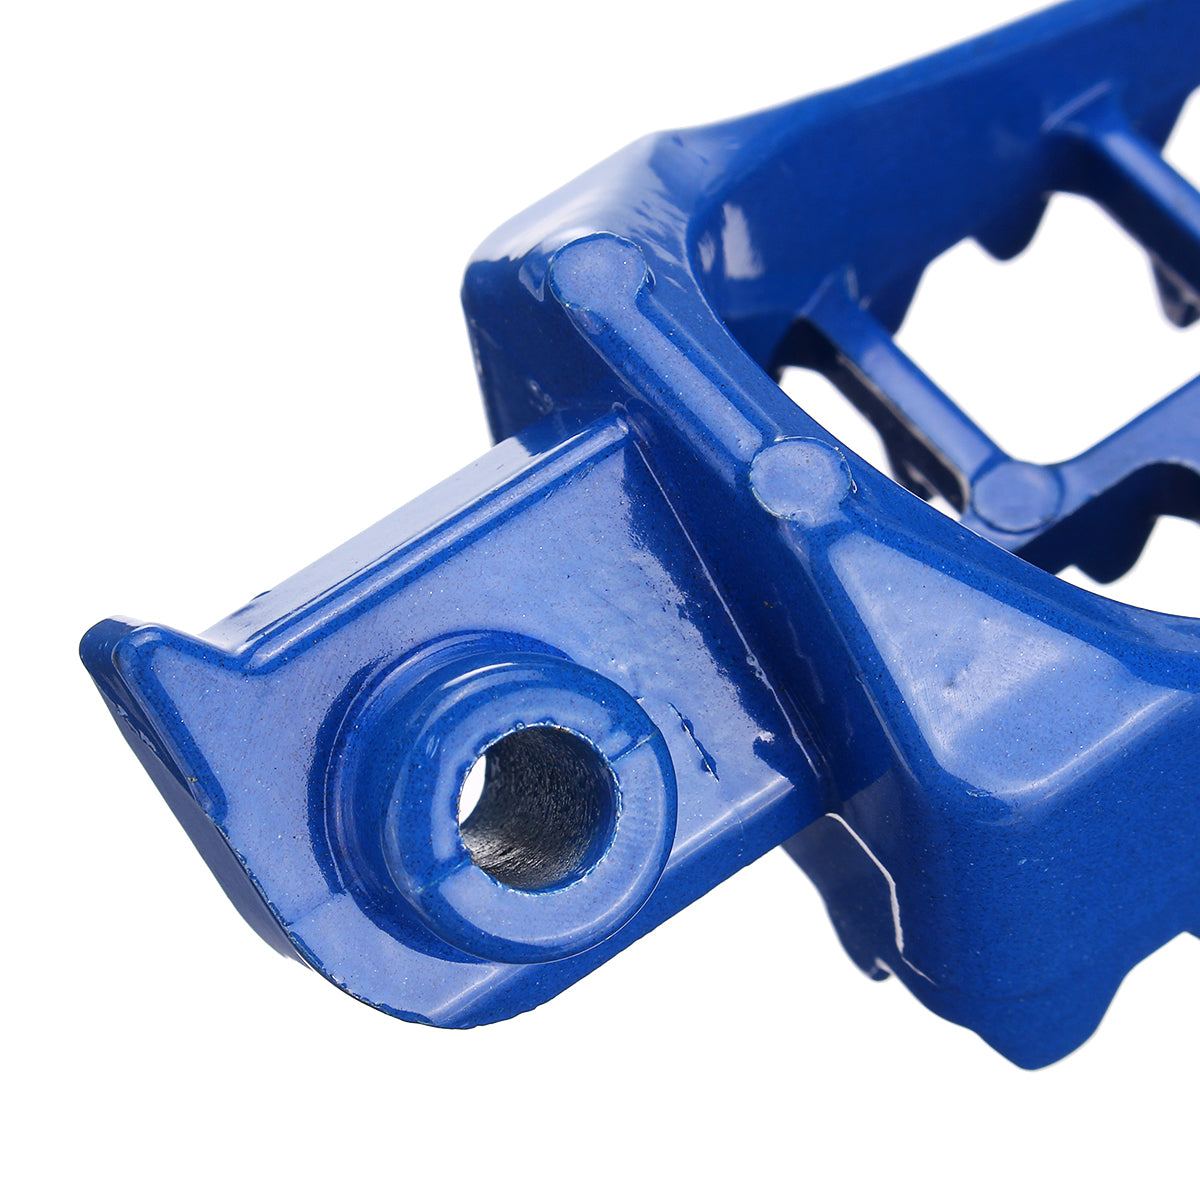 Cornflower Blue Wide Foot Pegs Footrests For Yamaha PW50 PW80 TW200 Honda XR/CRF Pit Dirt Bike